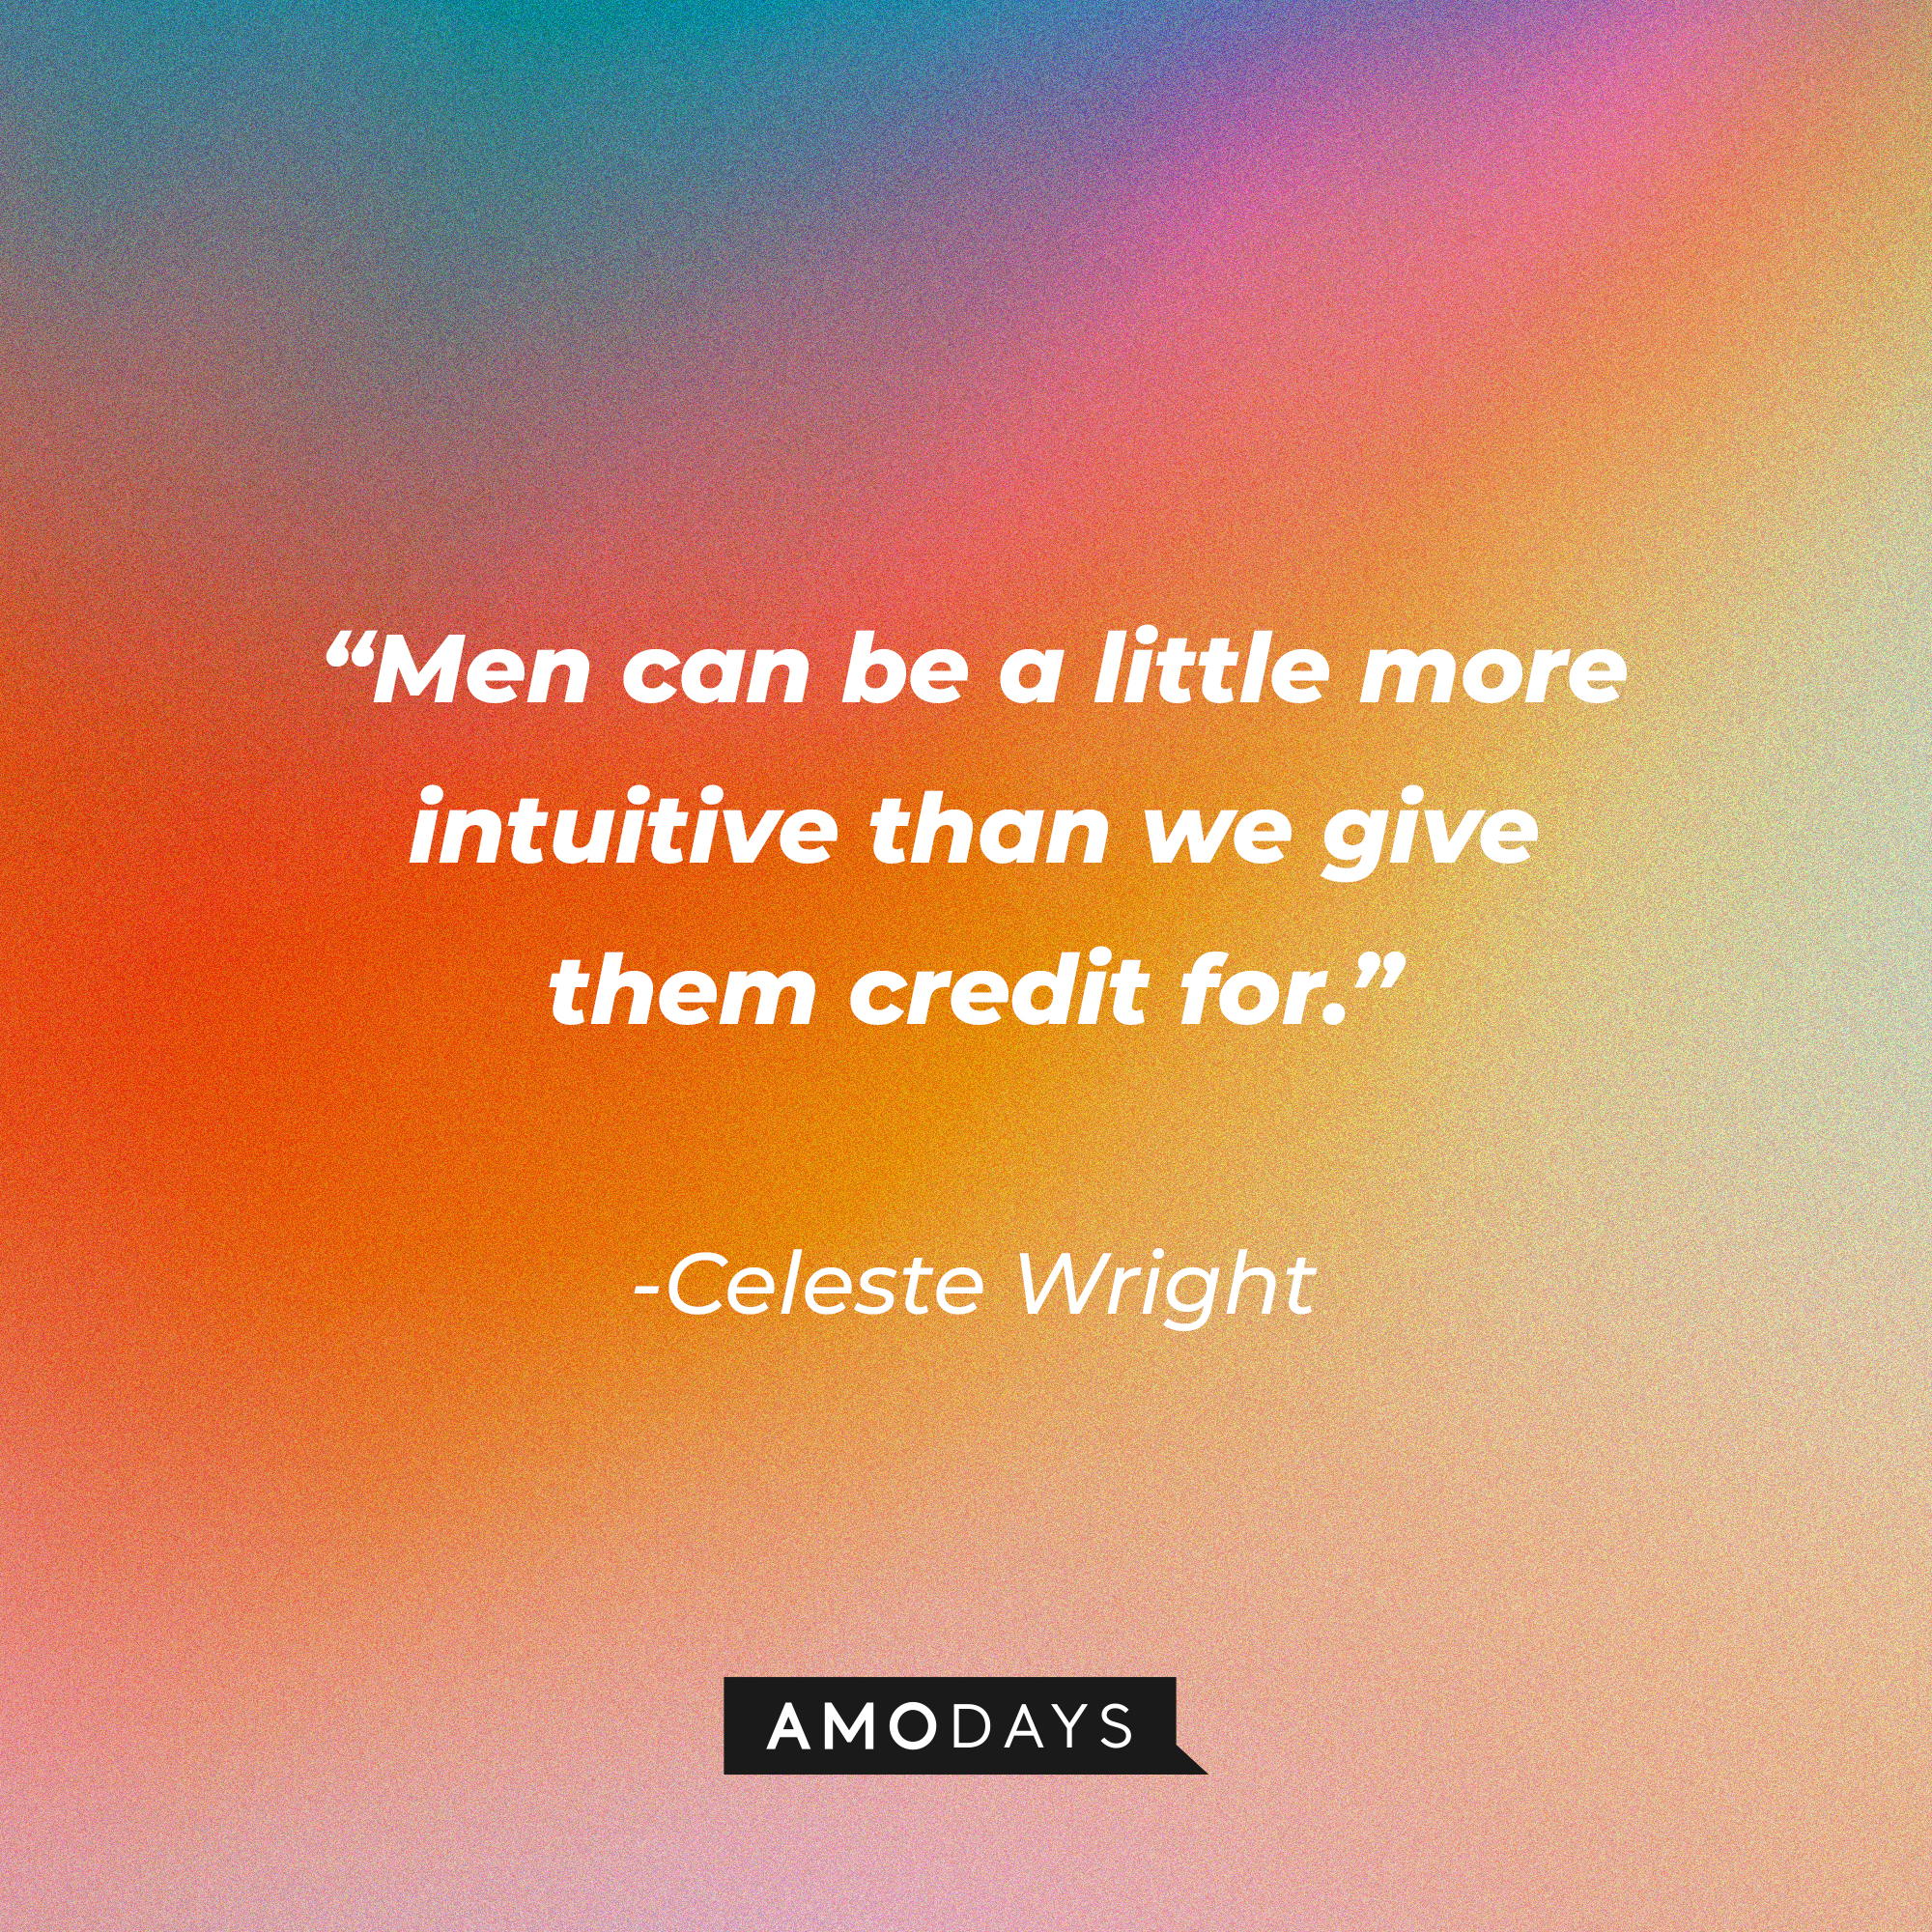 Celeste Wright’s quote: “Men can be a little more intuitive than we give them credit for.” │Source: AmoDays